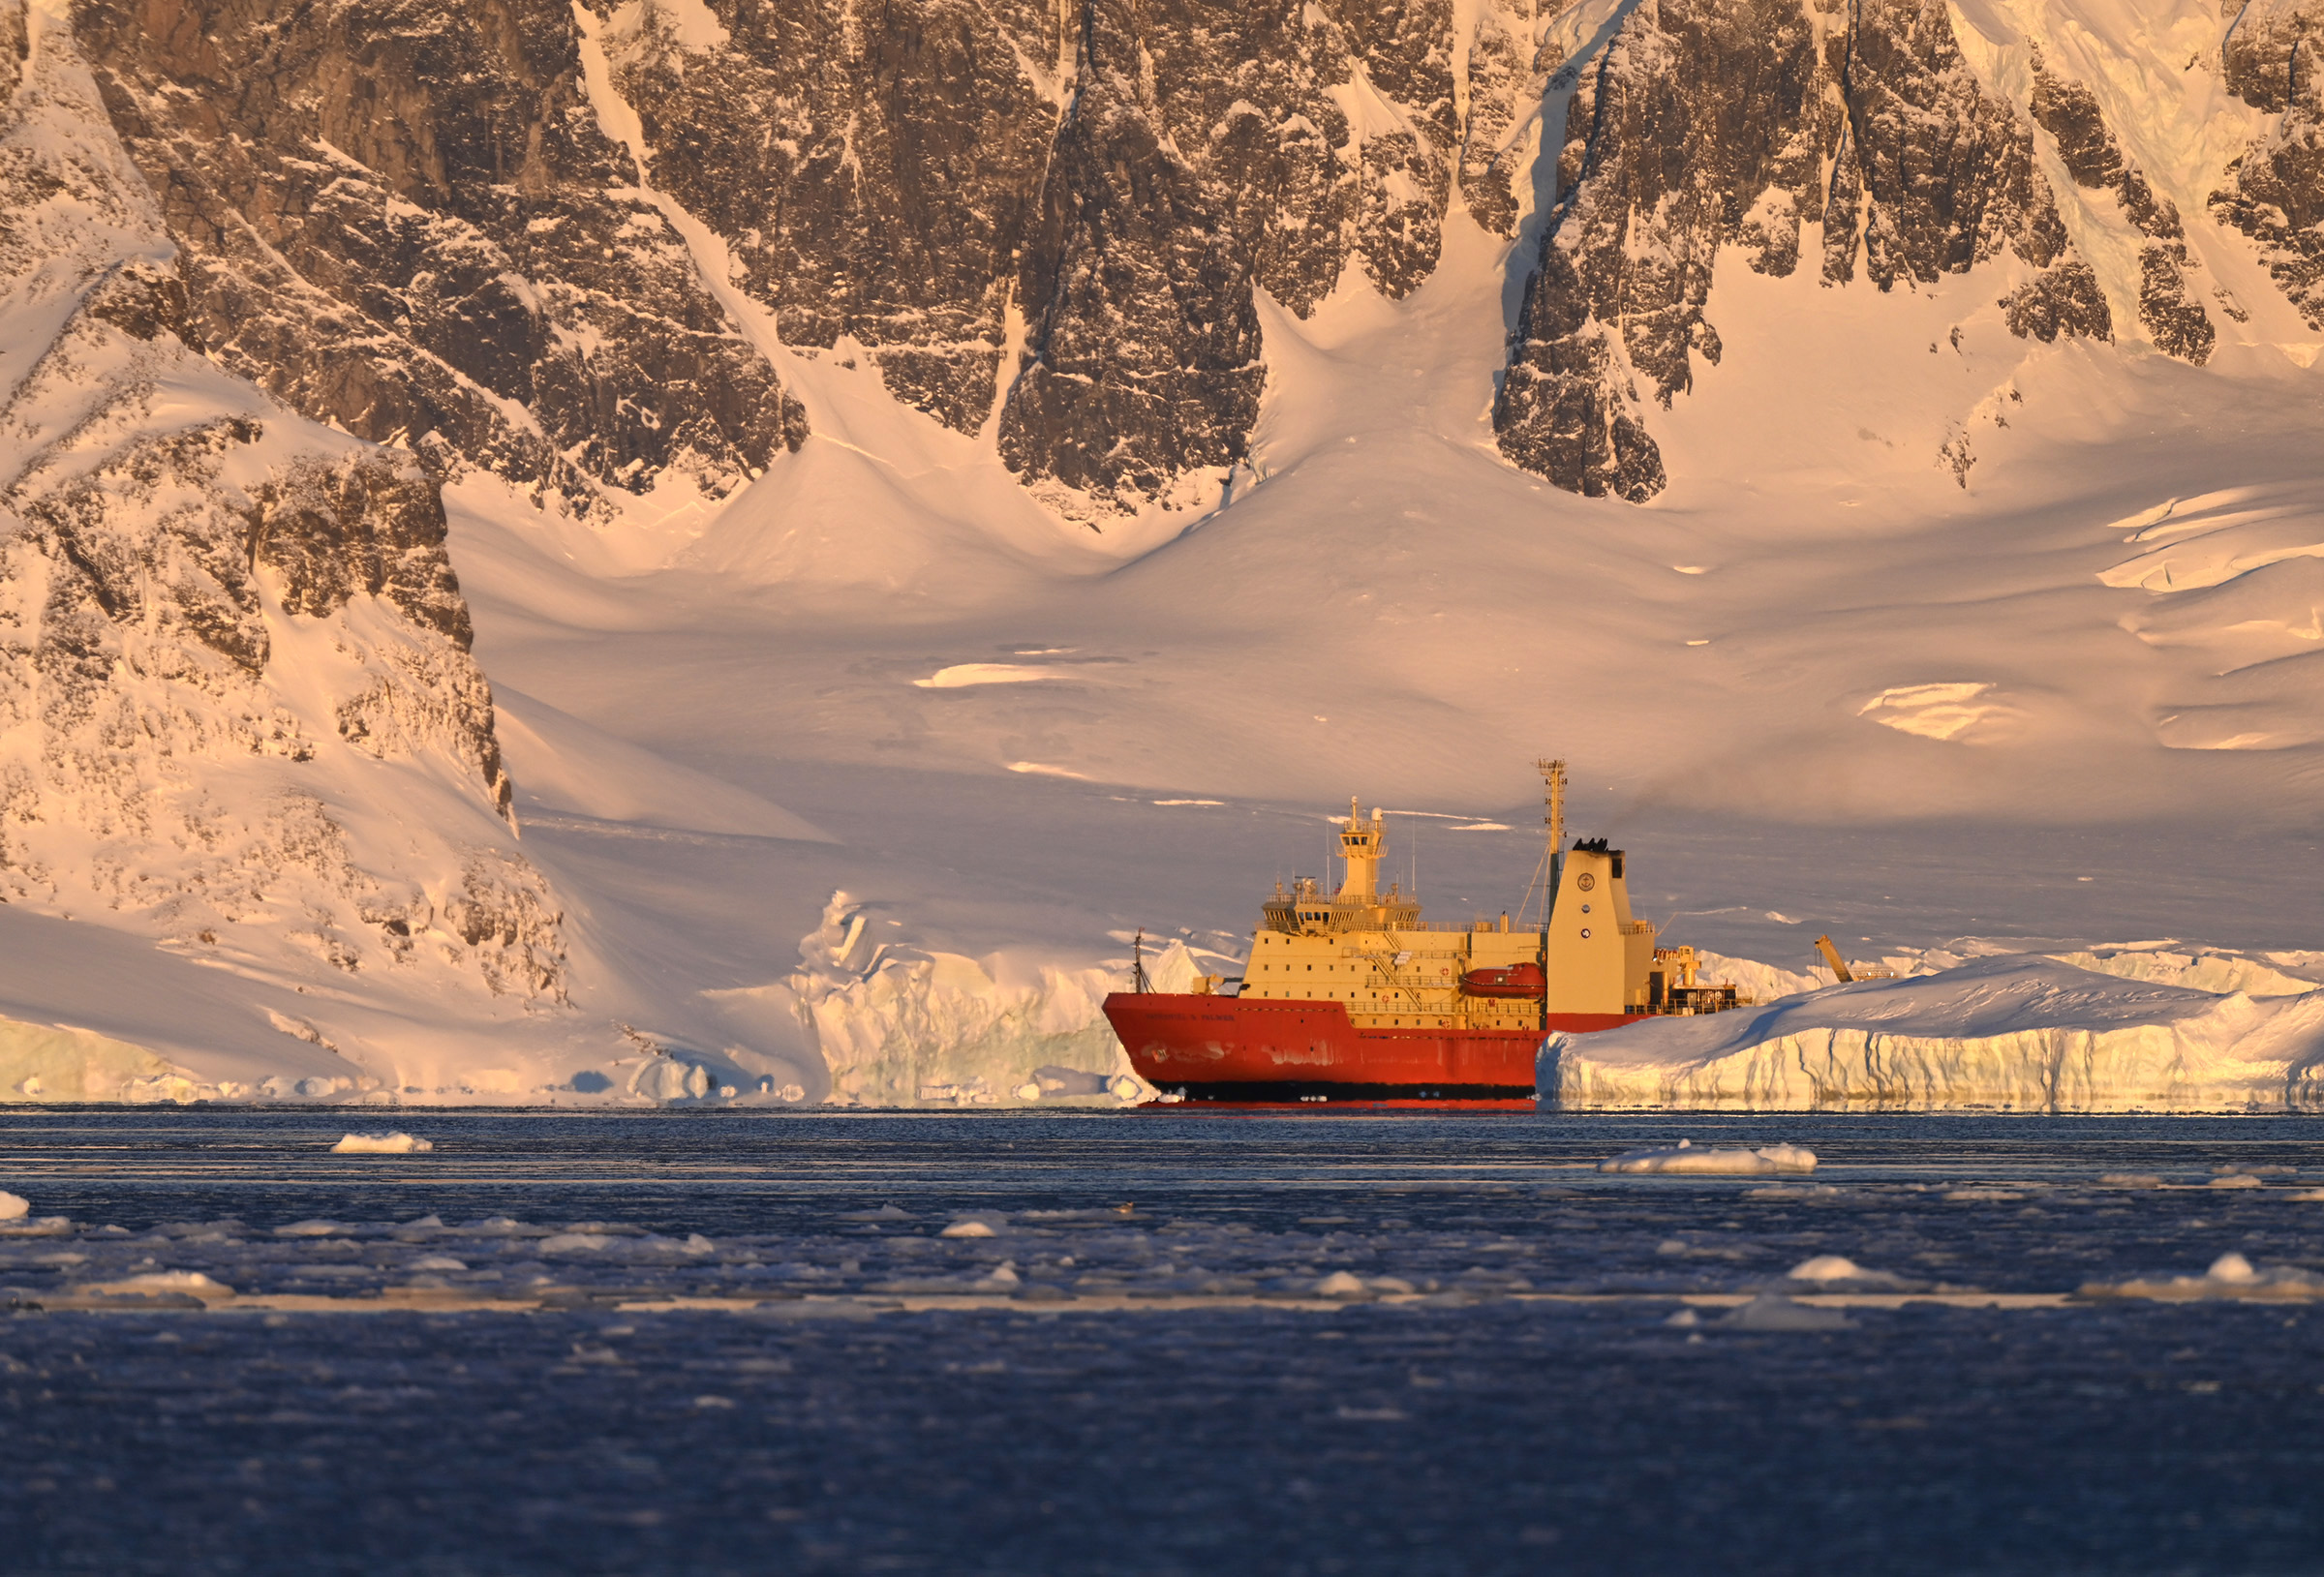 An orange and yellow ship amongst icebergs and cliffsides